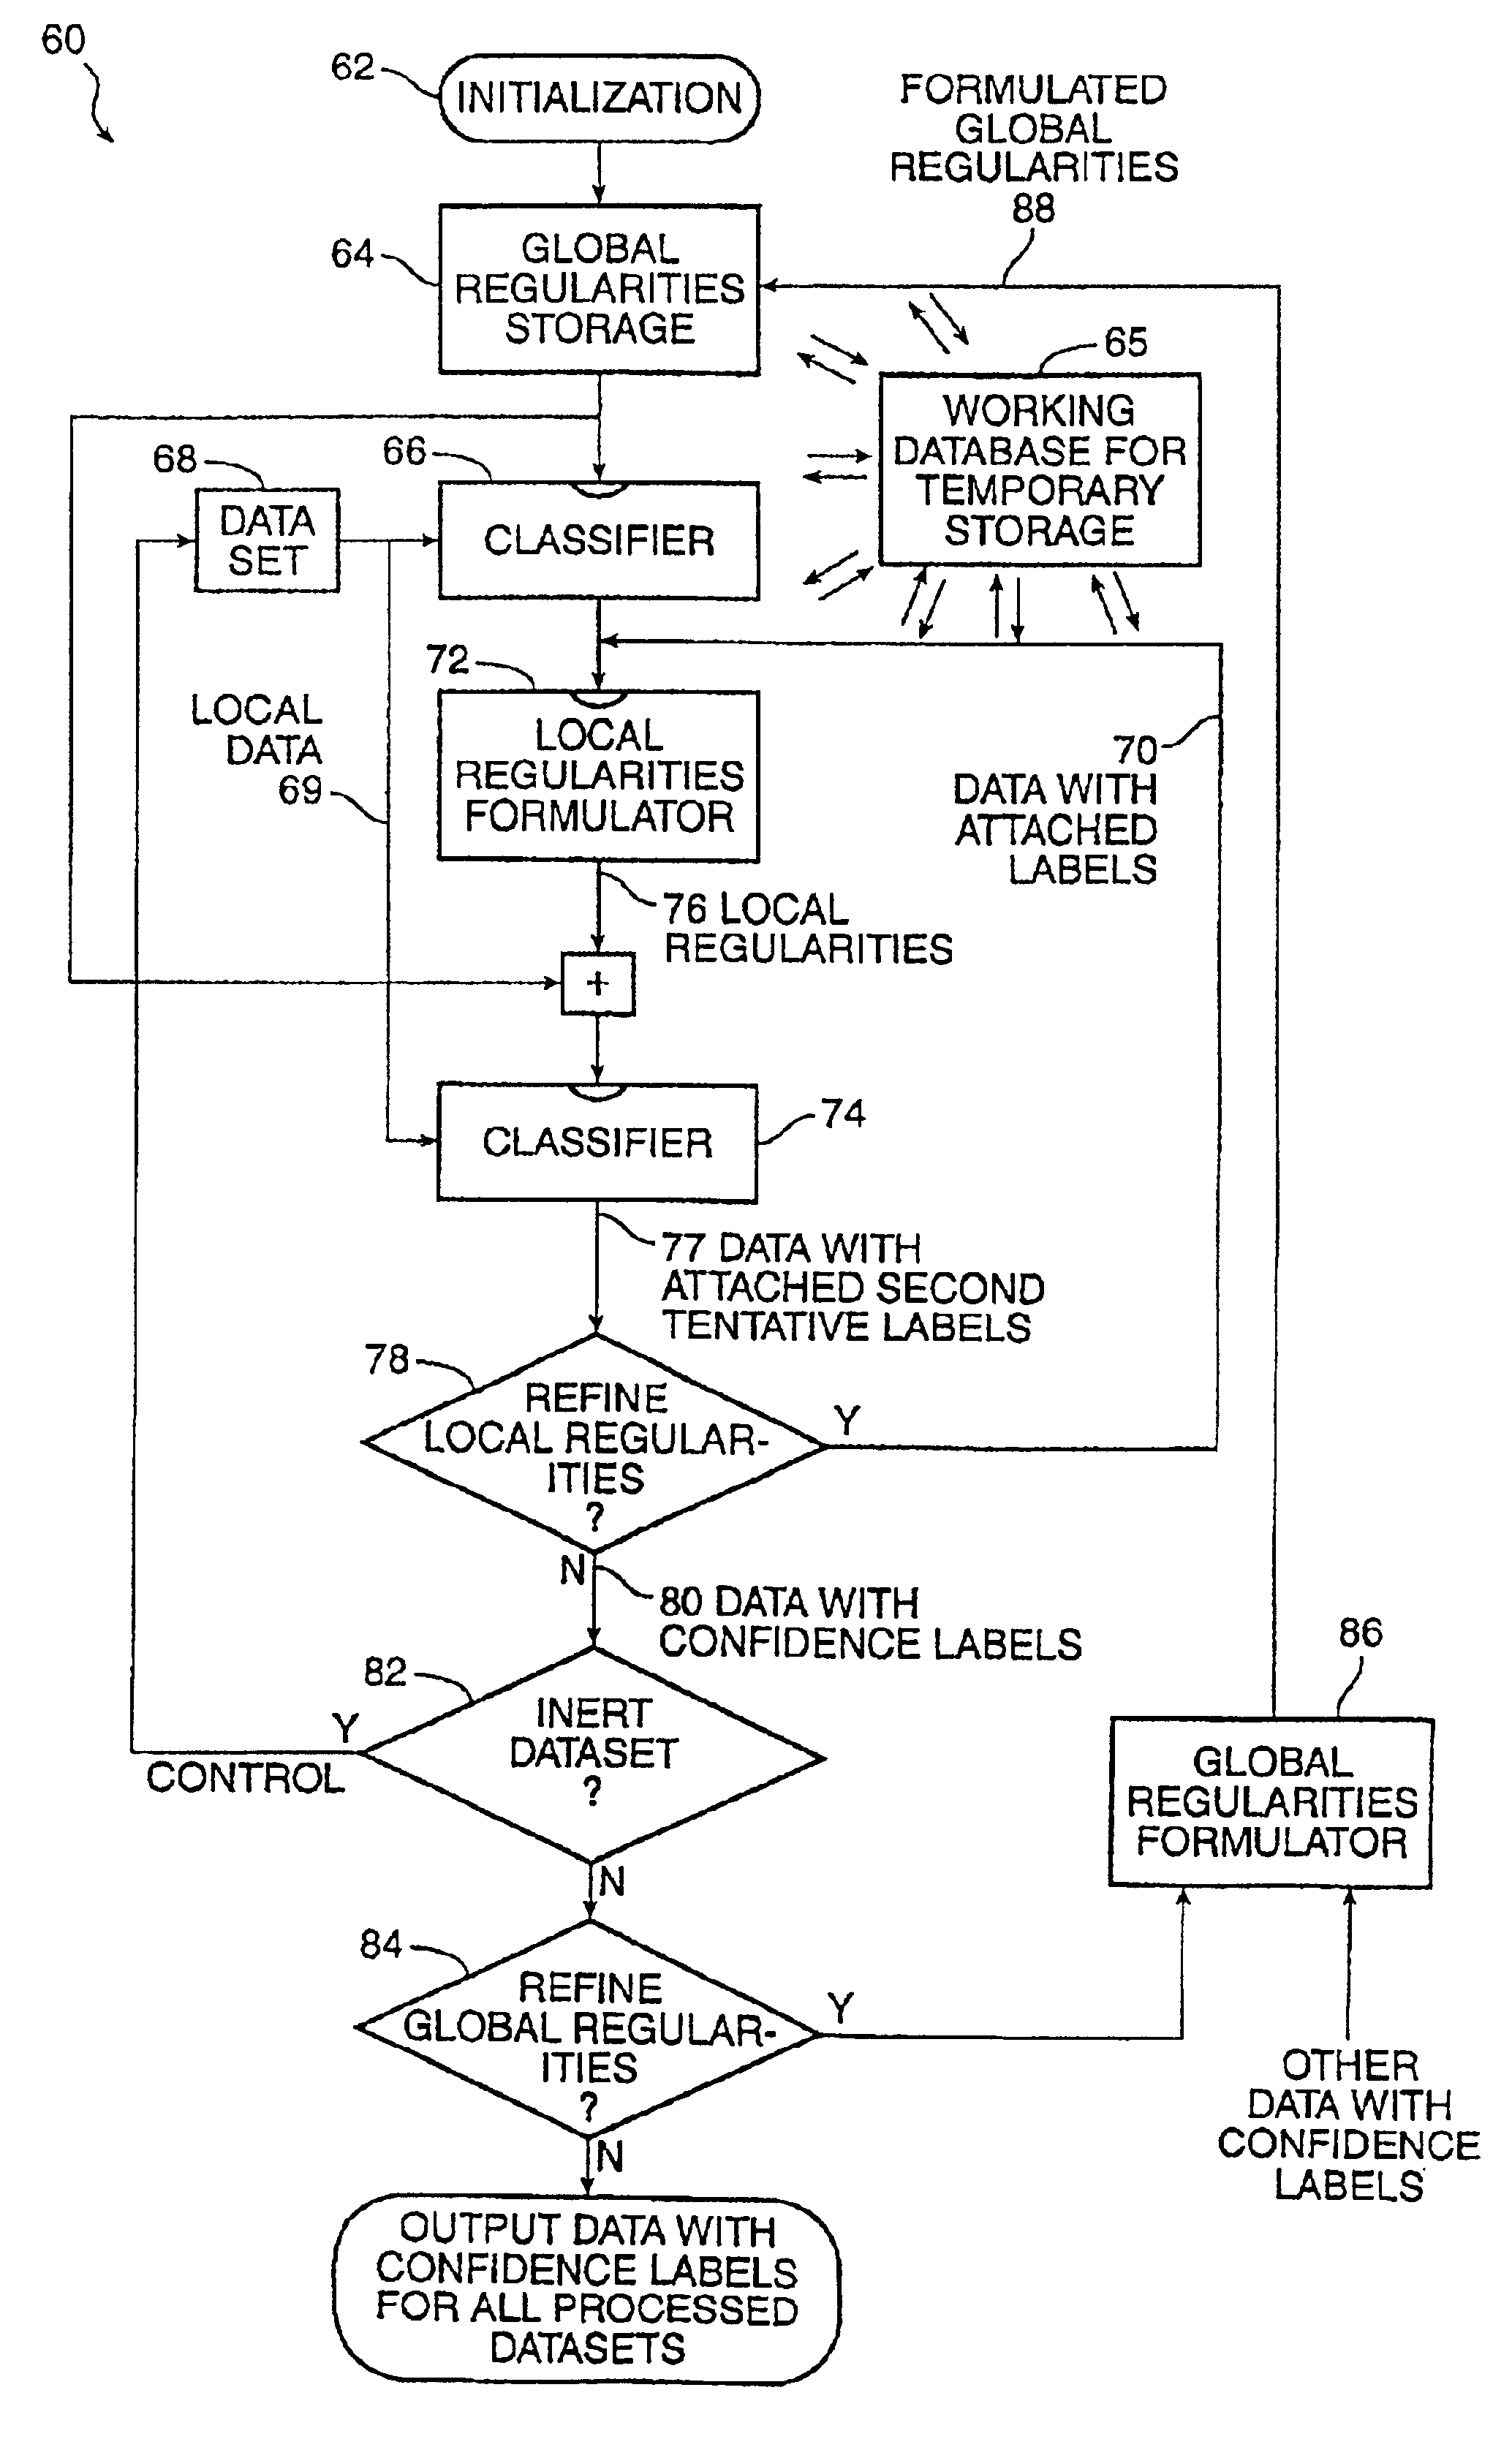 Method for learning and combining global and local regularities for information extraction and classification